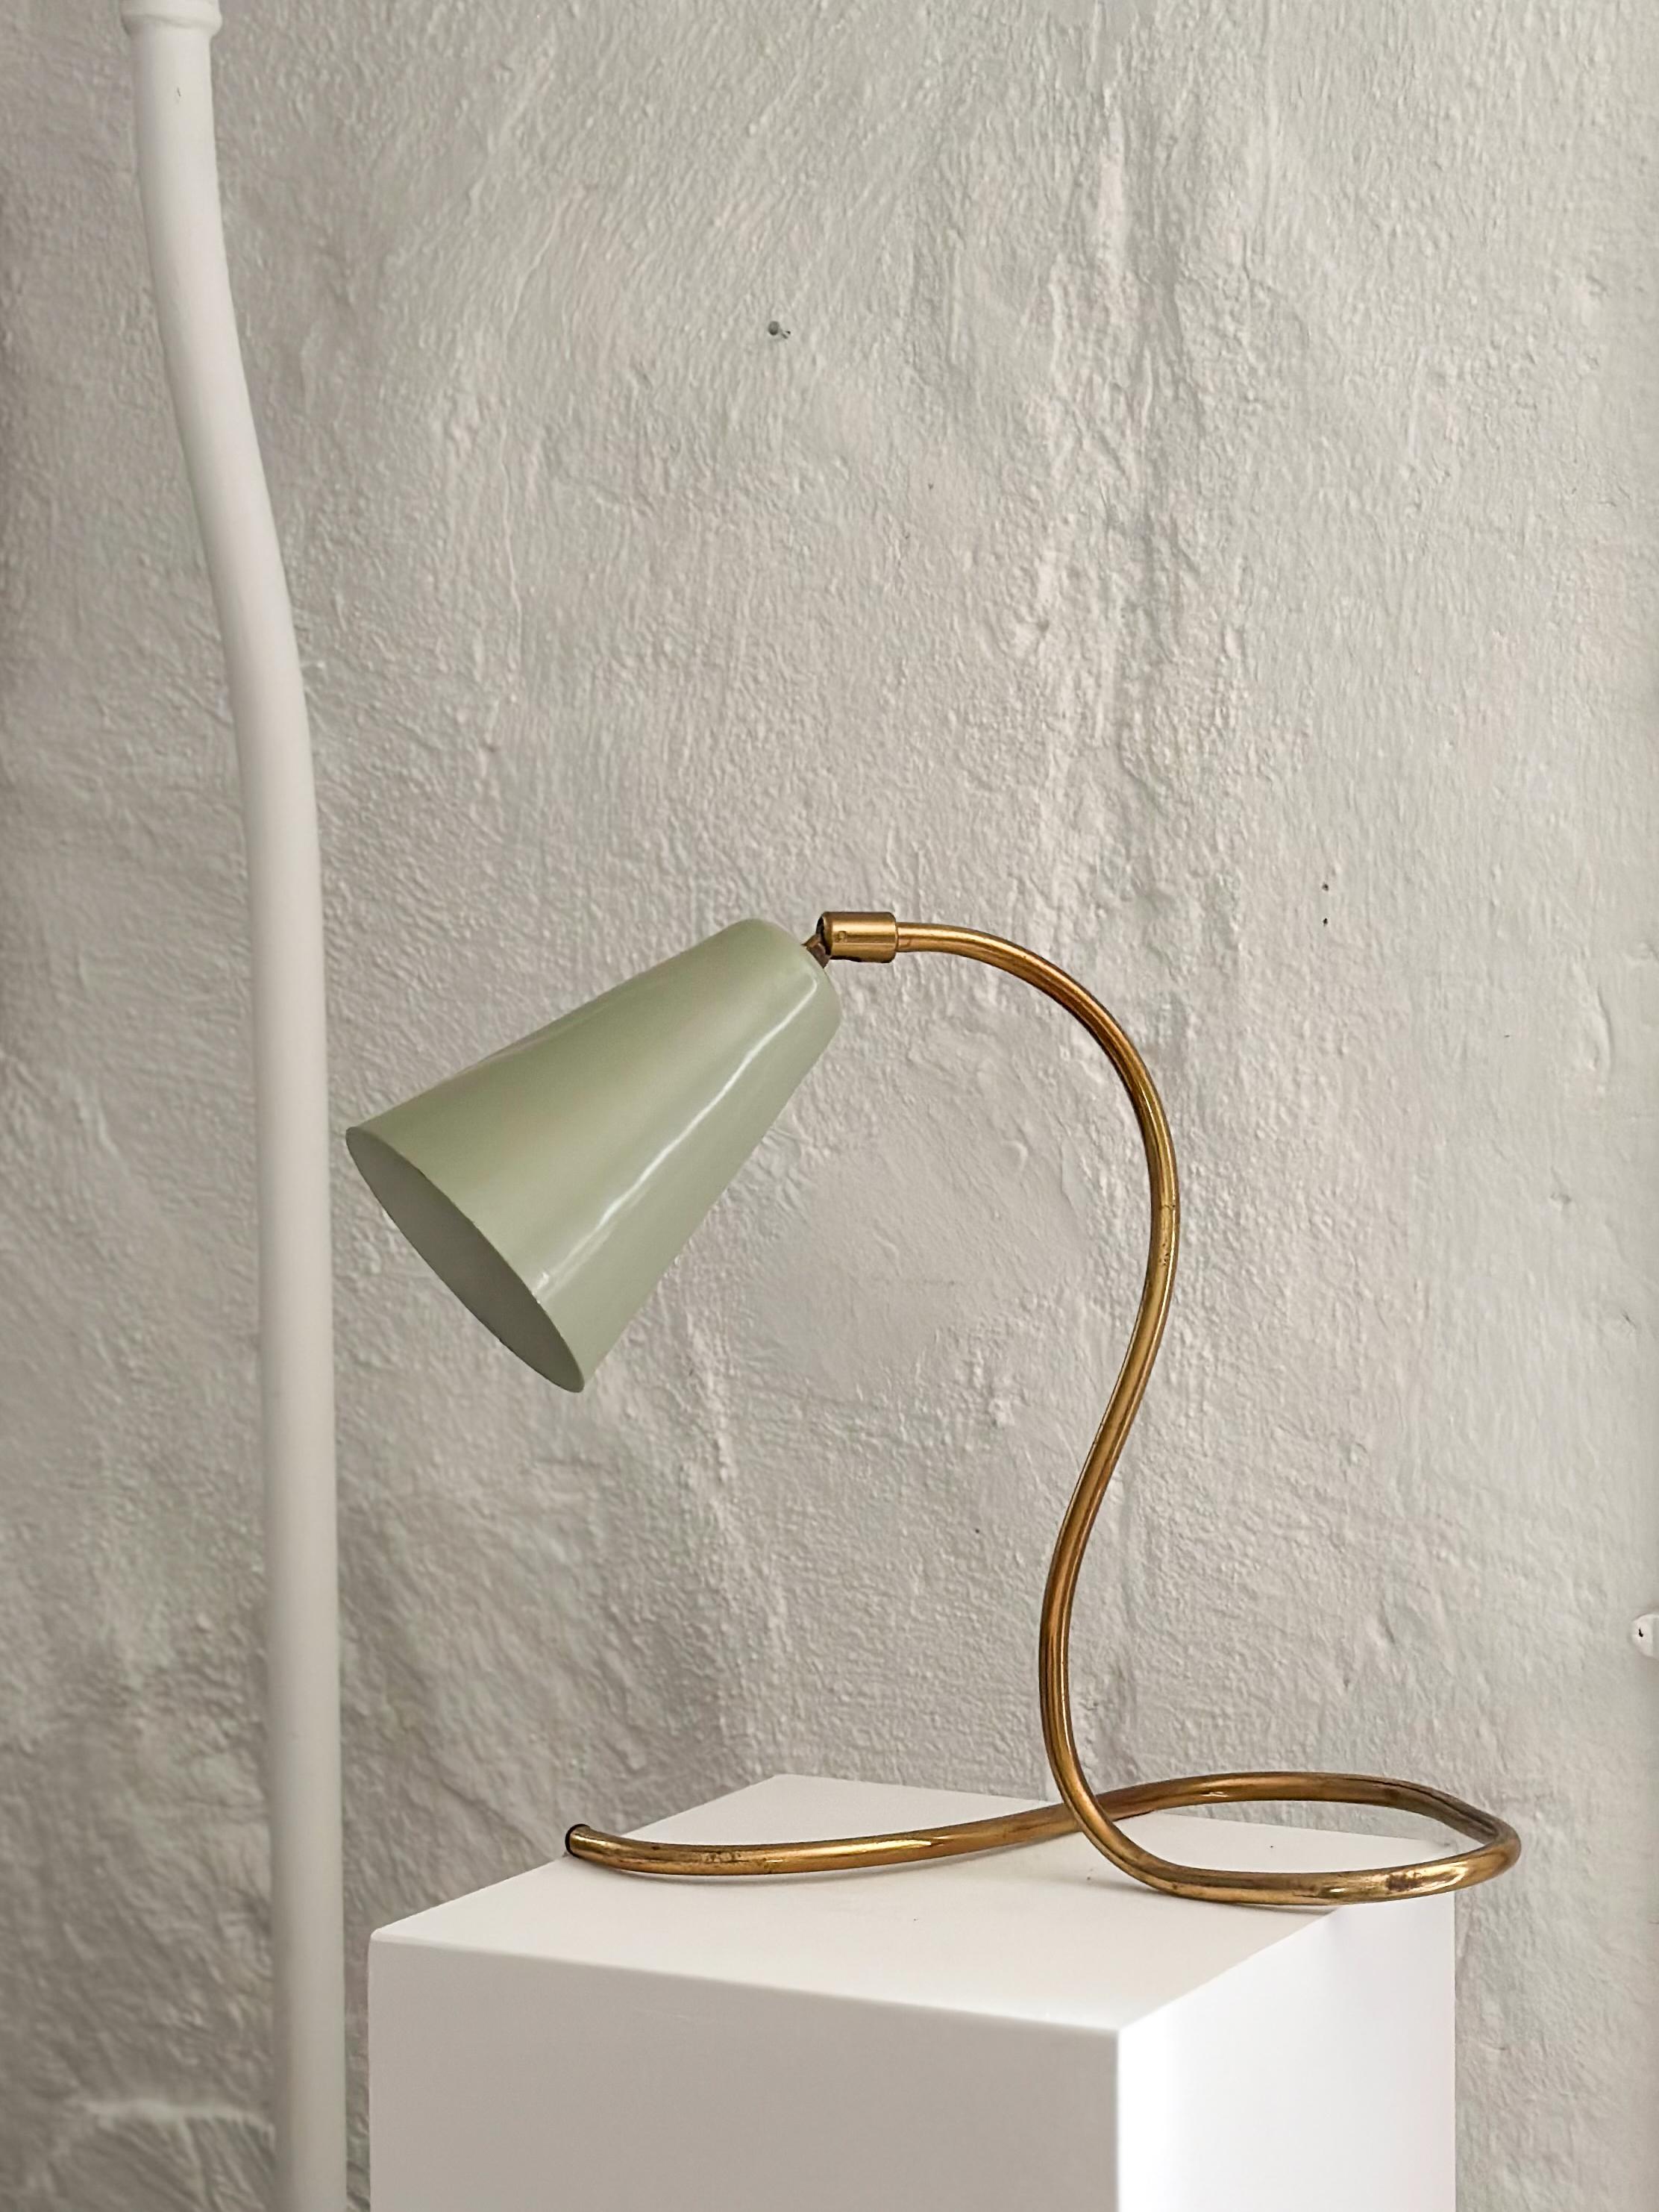 Swedish Modern brass table lamp with grey lacquered metal shade and a stunning curved design. By unknown Swedish maker in the 1950s but similar to designs by Hans Bergström from the period. Decorative as a desk lamp or beside the bed. Marked AJH